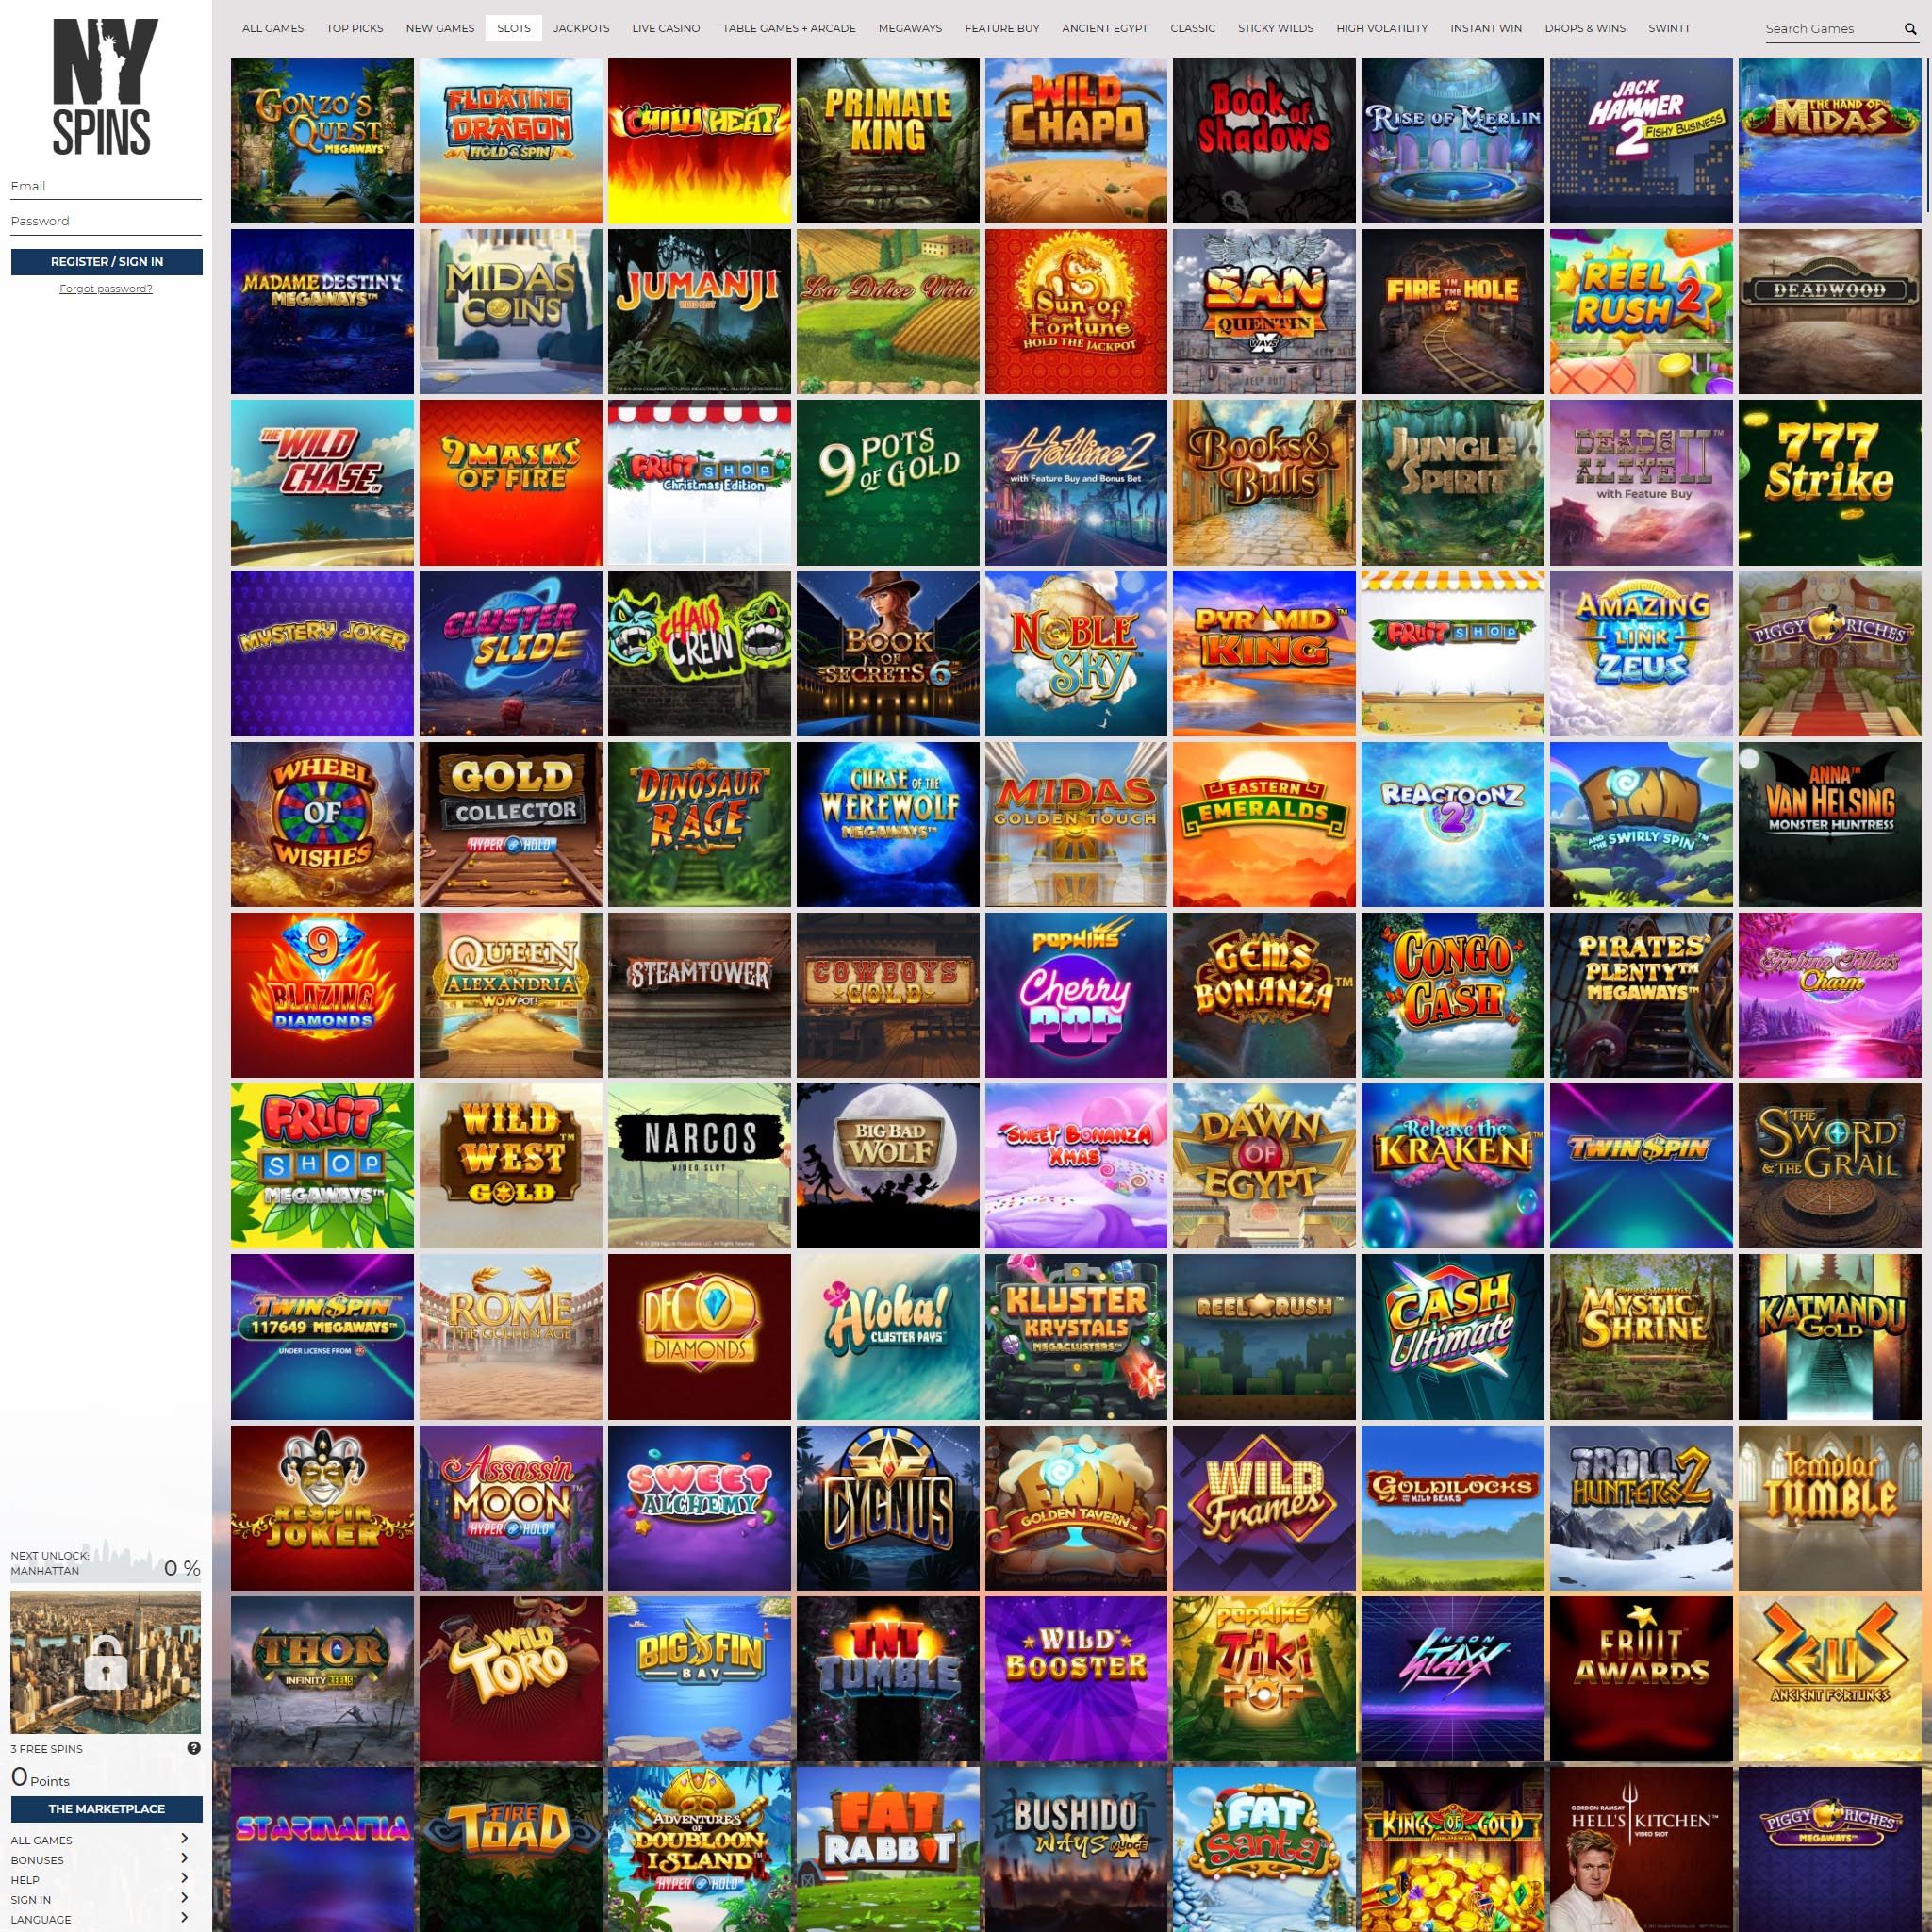 Find NYspins game catalog